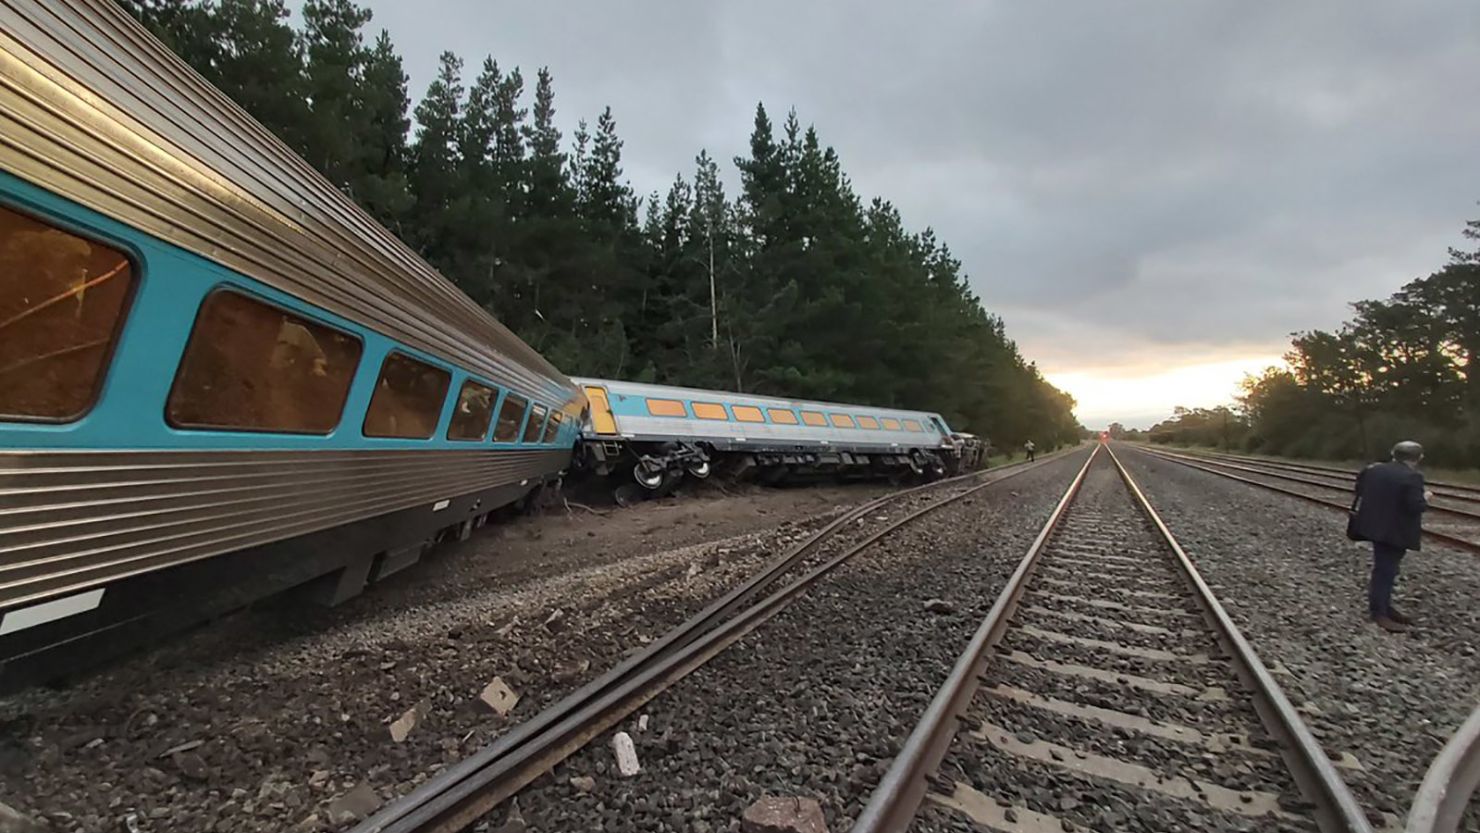 The train derailed north of Melbourne on Thursday evening.